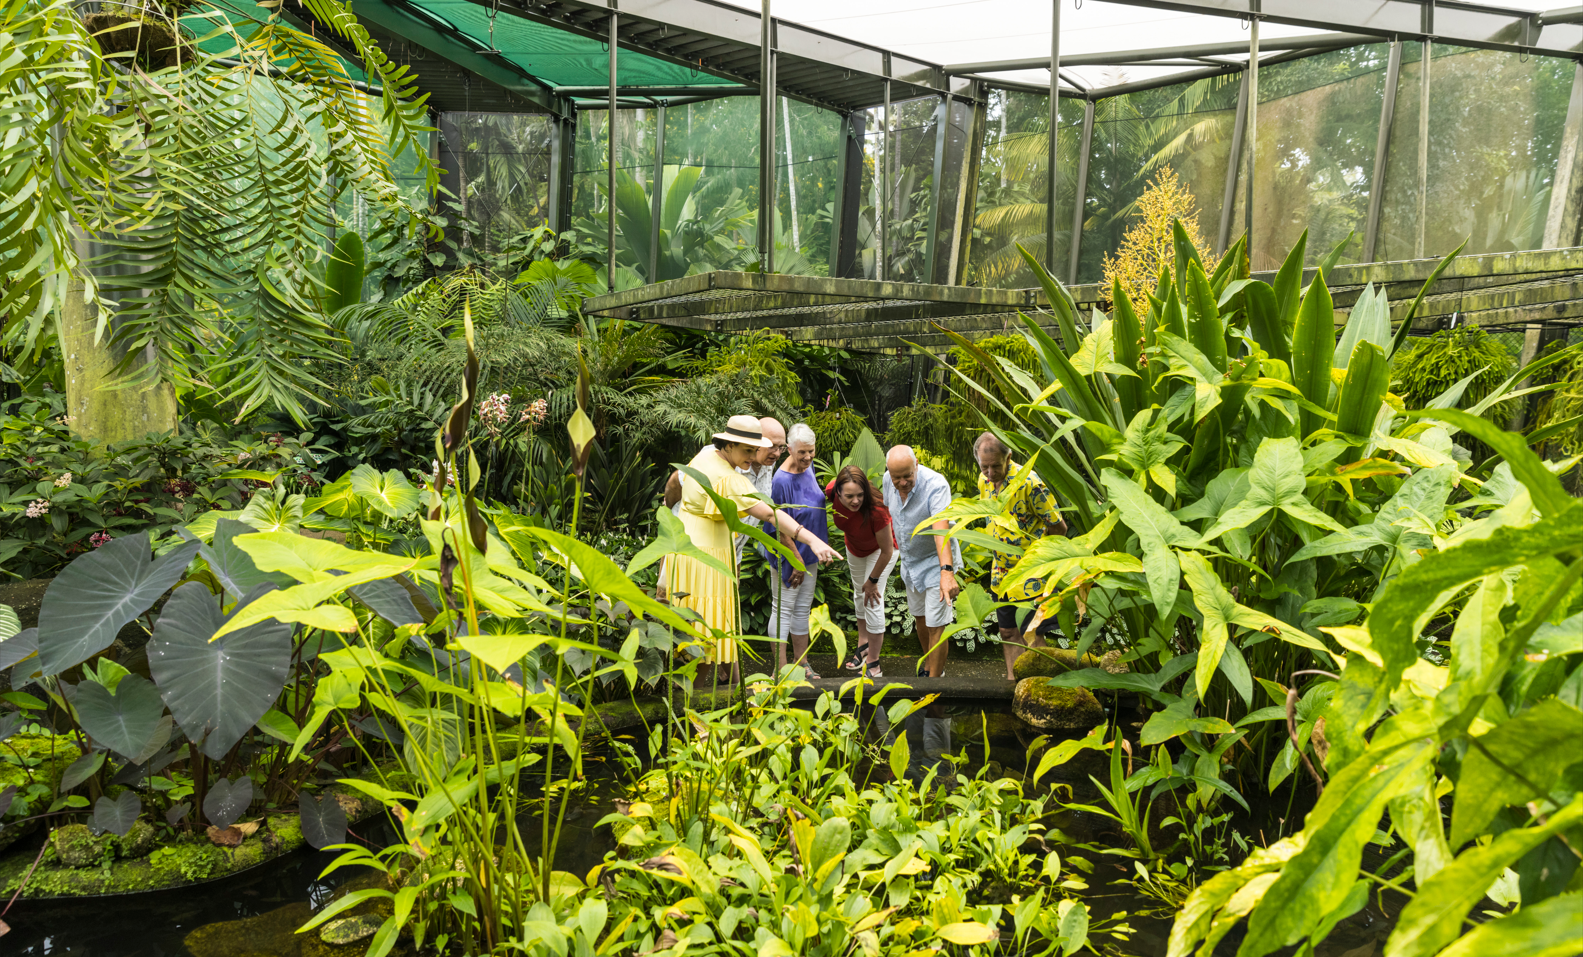 A Group Of People In A Greenhouse